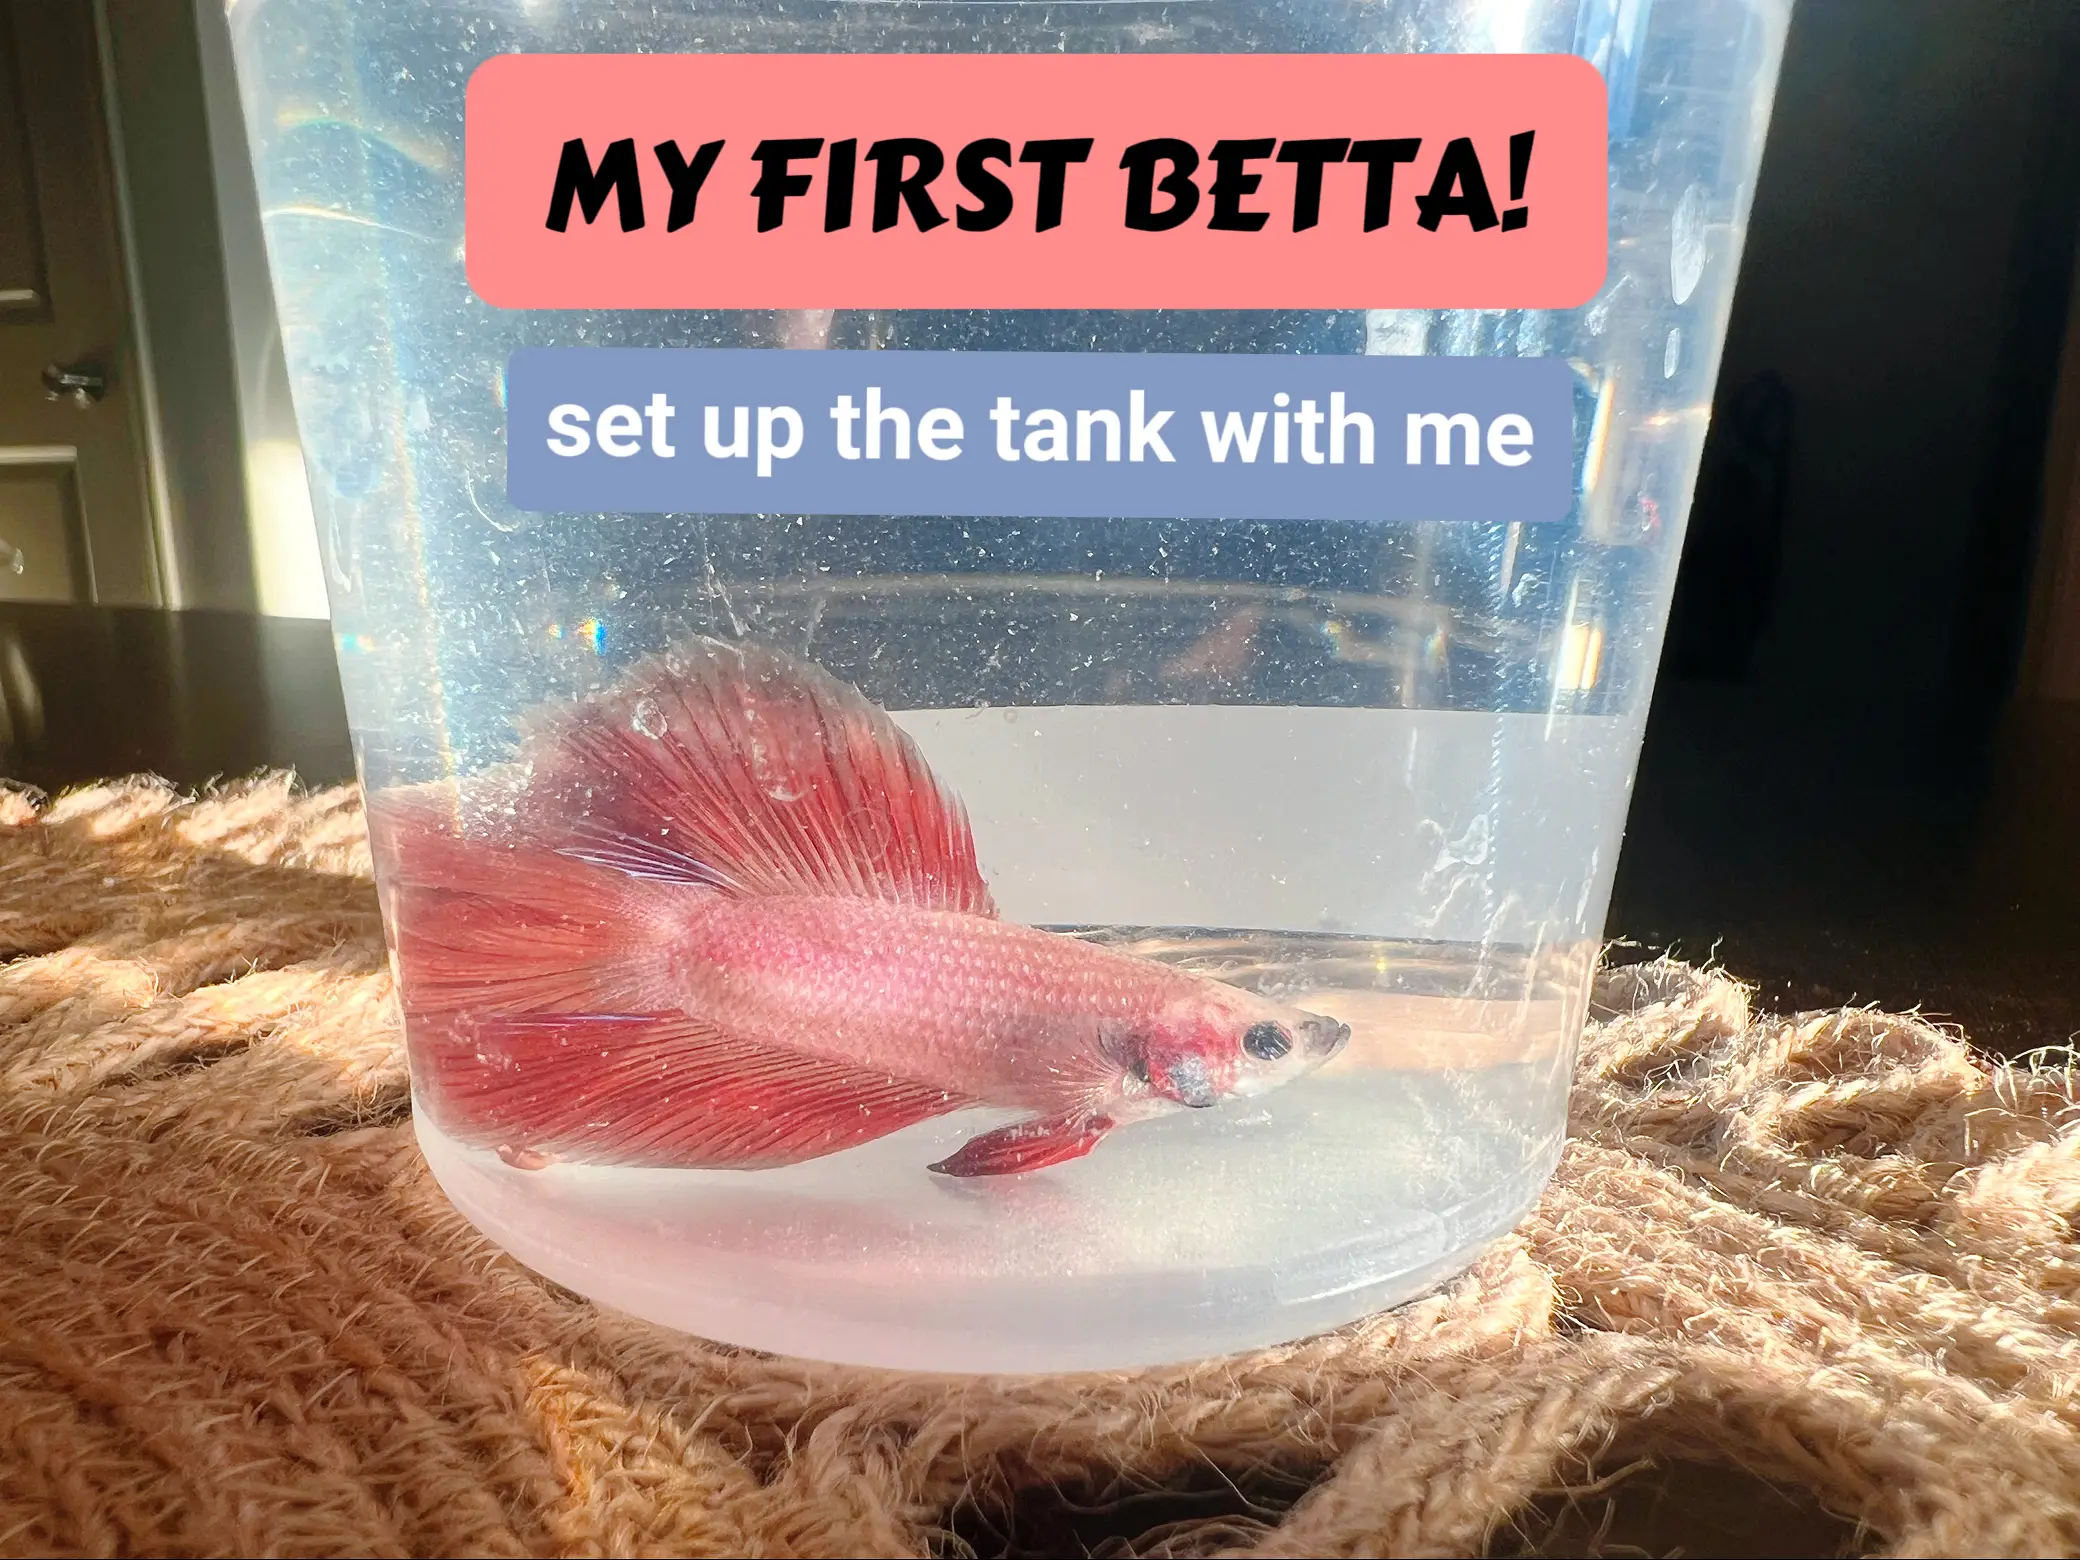 Small Betta Fish Tank, Aquarium Stater Kit, Fish Bowl Tank Set With Decor  Accessories, DIY Handmade Crafts, Xmas Gifts for Him / Her -  Finland